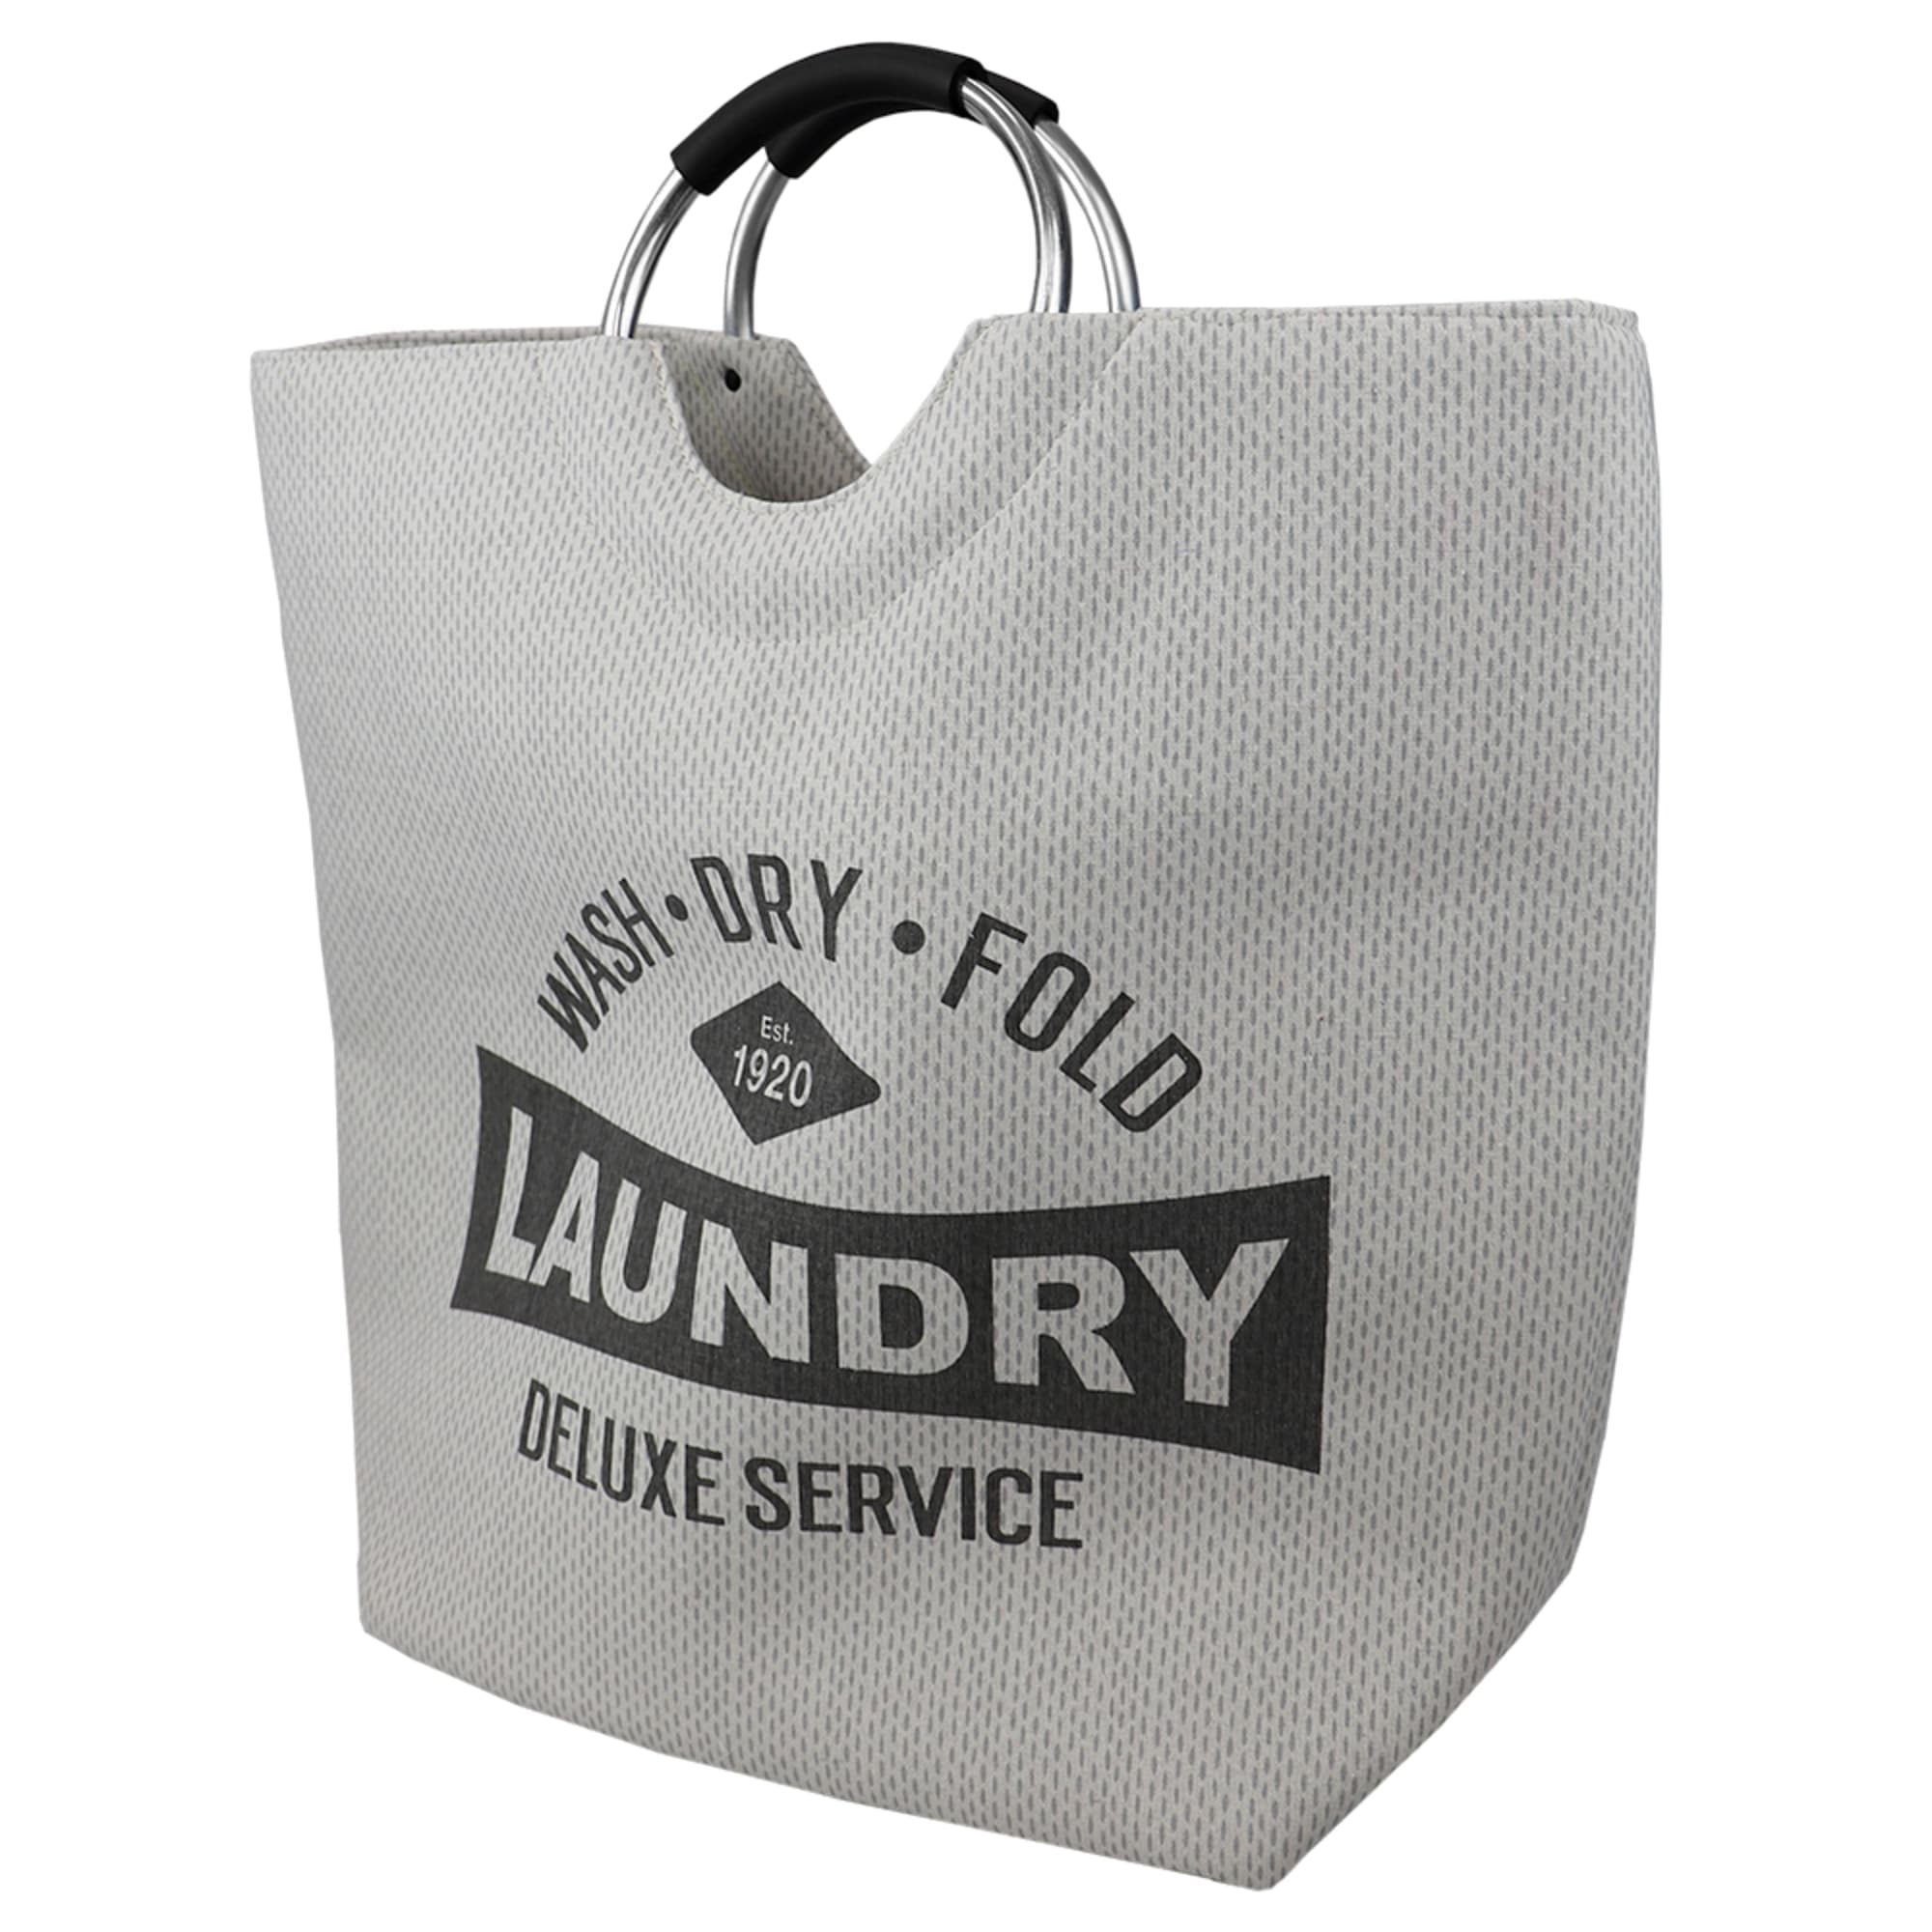 Home Basics Deluxe Service Wash Dry Fold Canvas Laundry Tote with Soft Grip Padded Aluminum Handles, Grey $12 EACH, CASE PACK OF 6